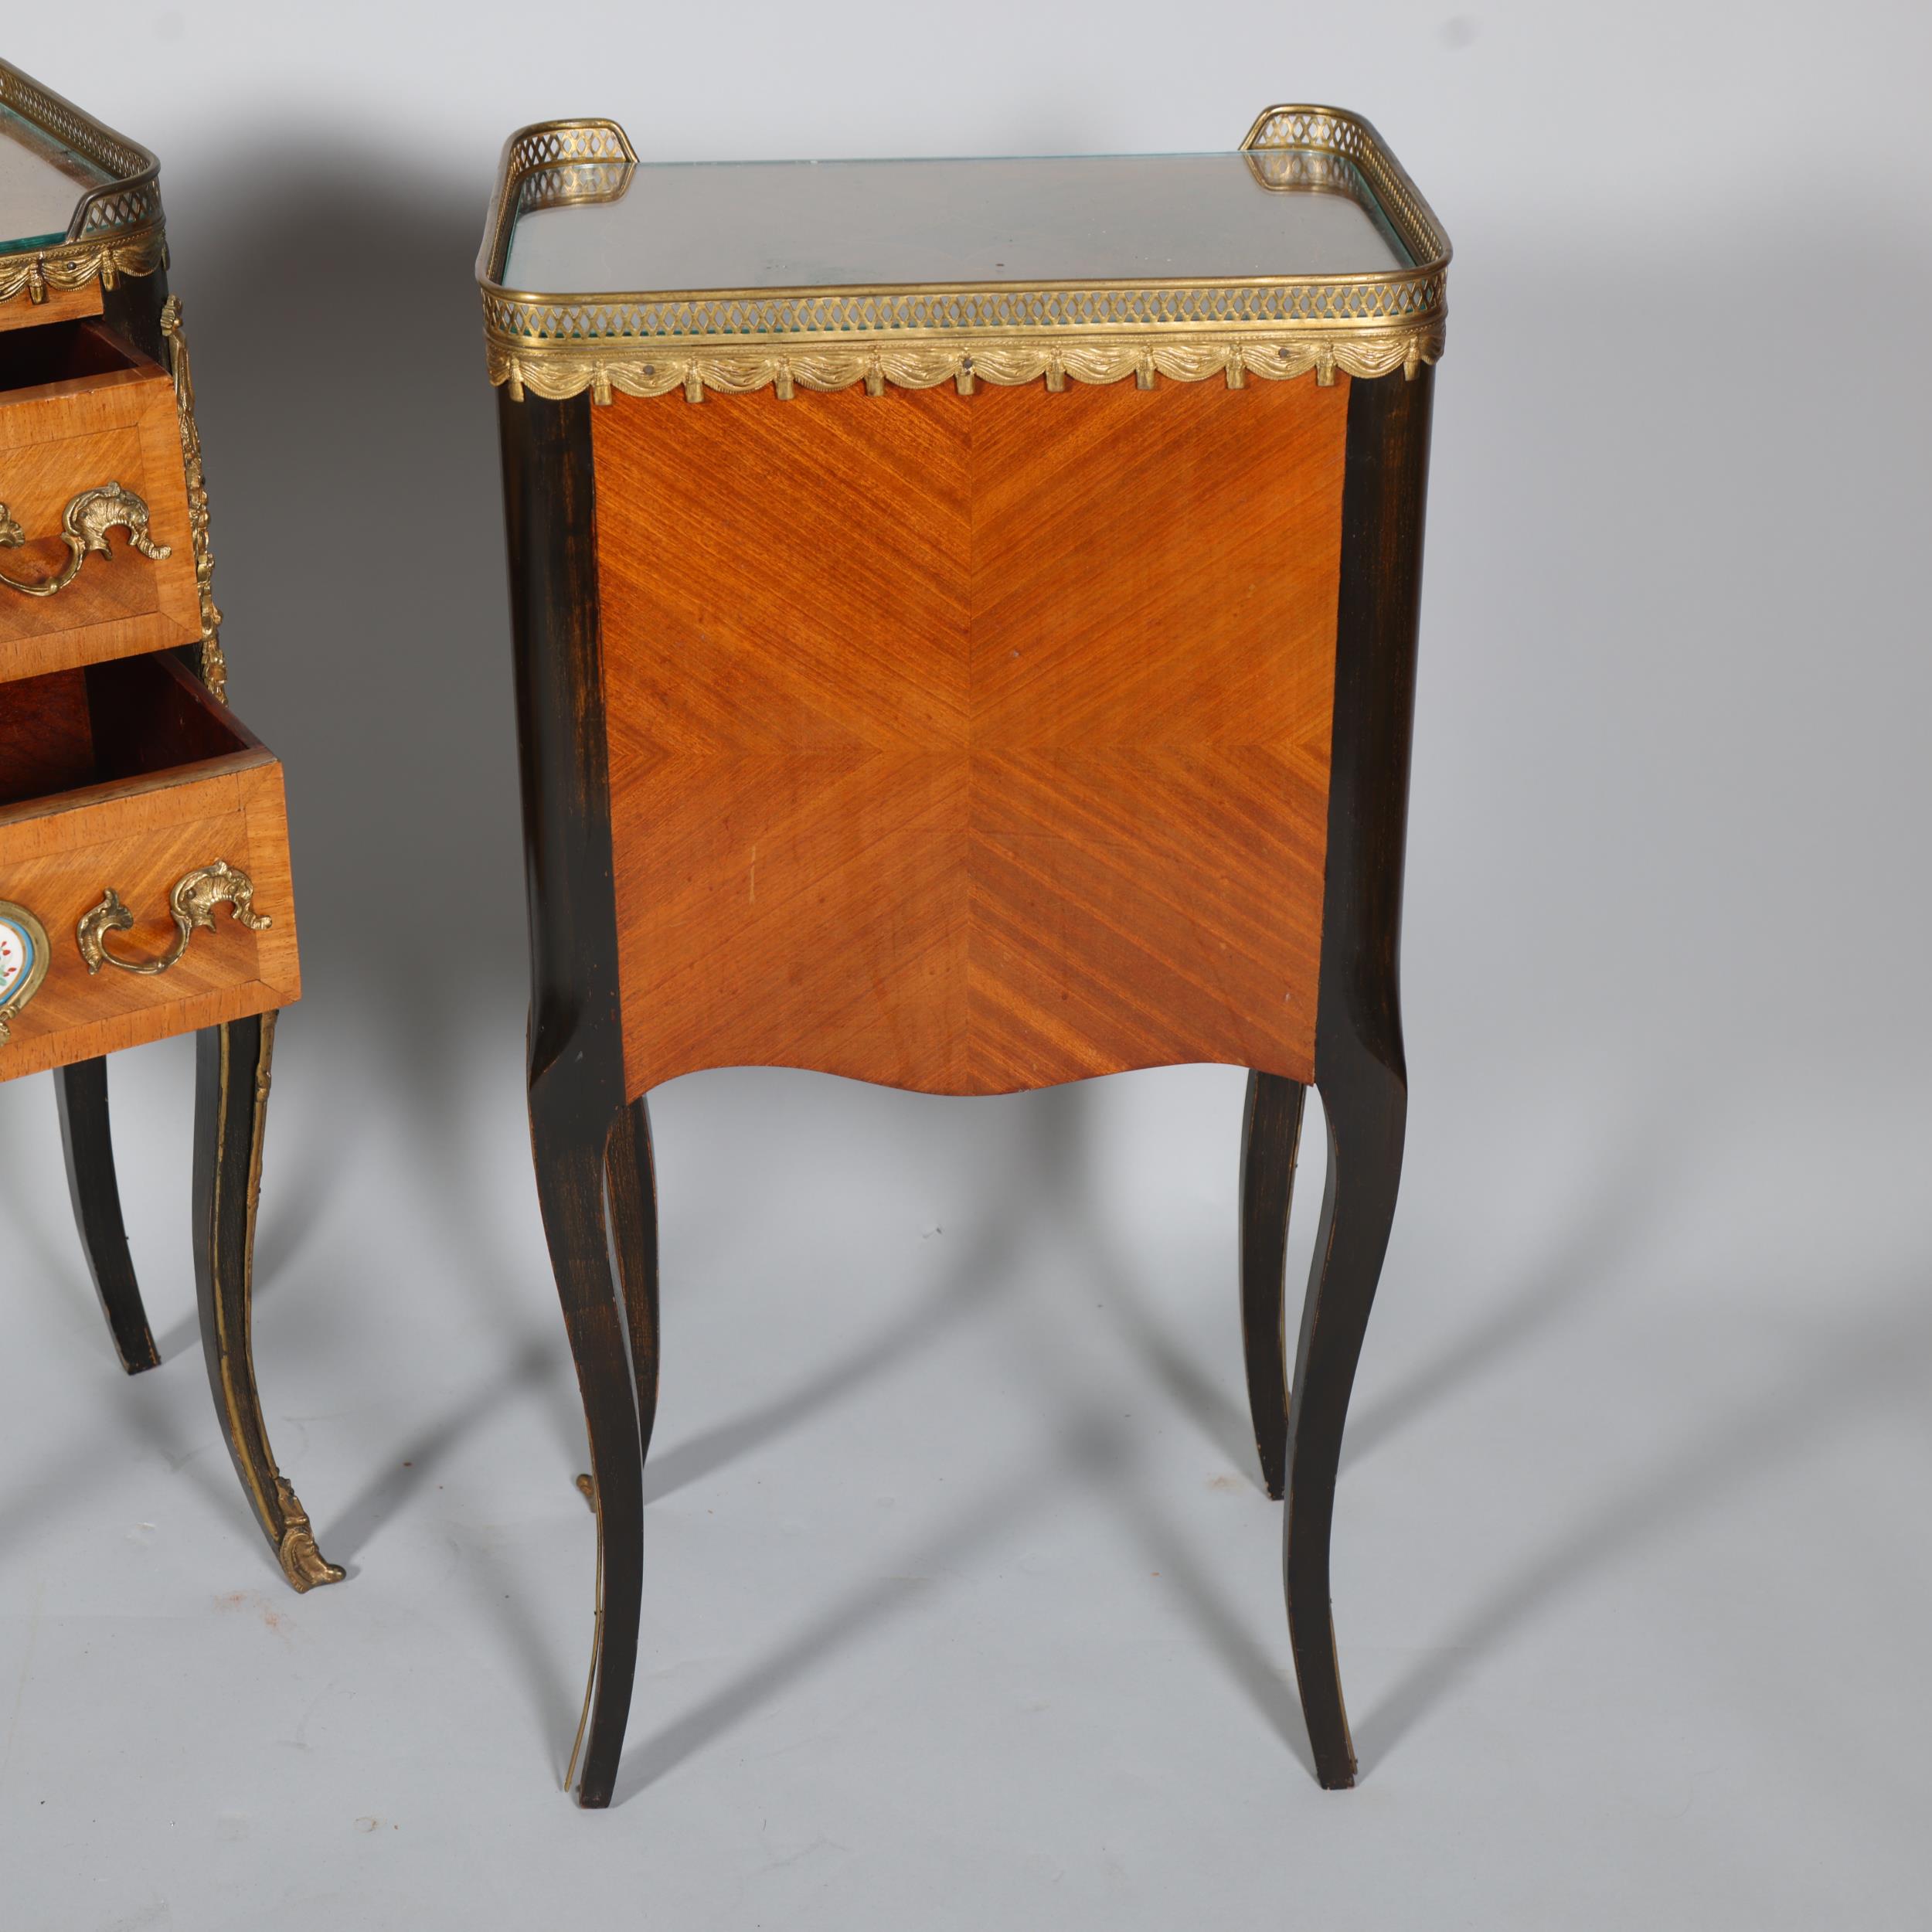 A pair of French walnut 2-drawer bedside chests, inset porcelain plaques to the drawer fronts, brass - Image 7 of 7